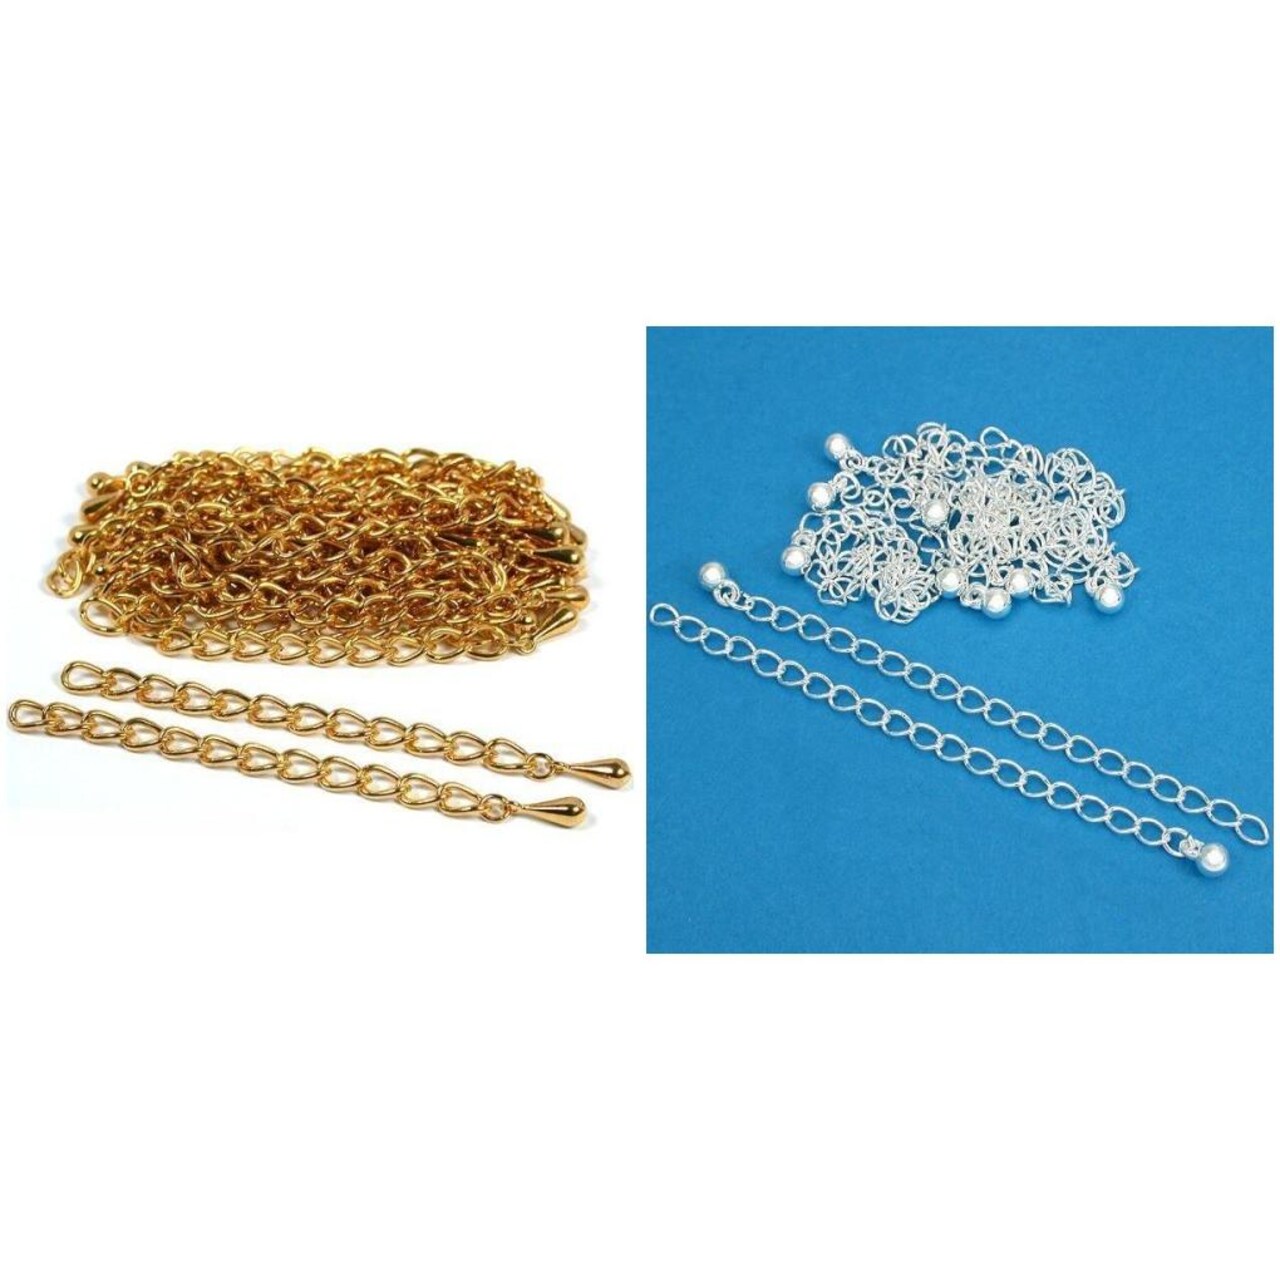 Gold & Silver Plated Necklace Chain Extenders Jewelry Repair